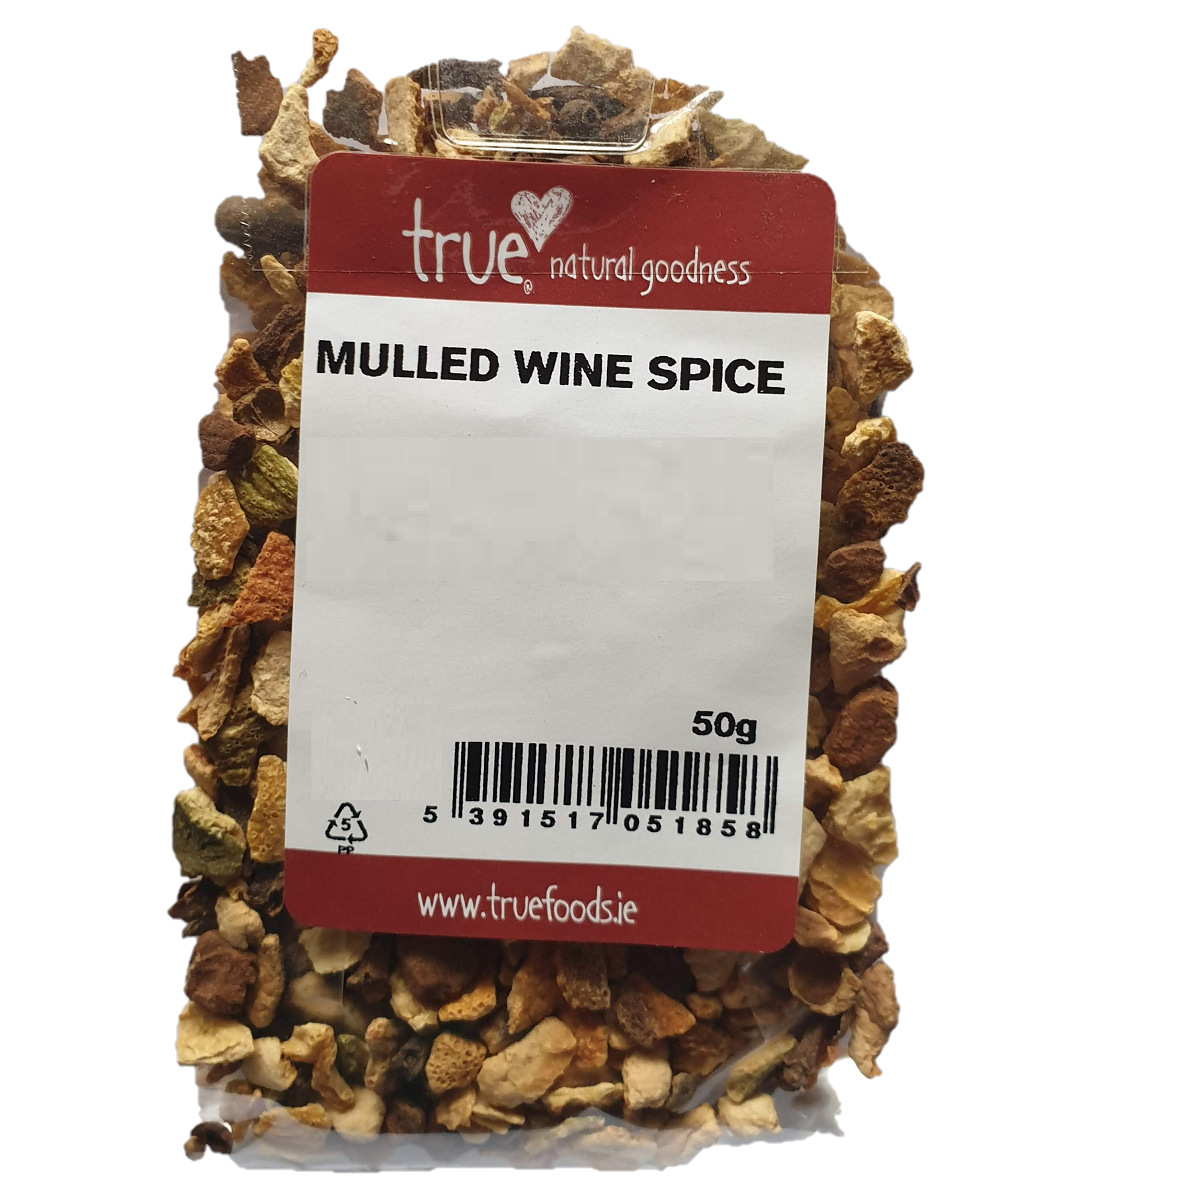 True Natural Goodness Mulled Wine Spice 50g